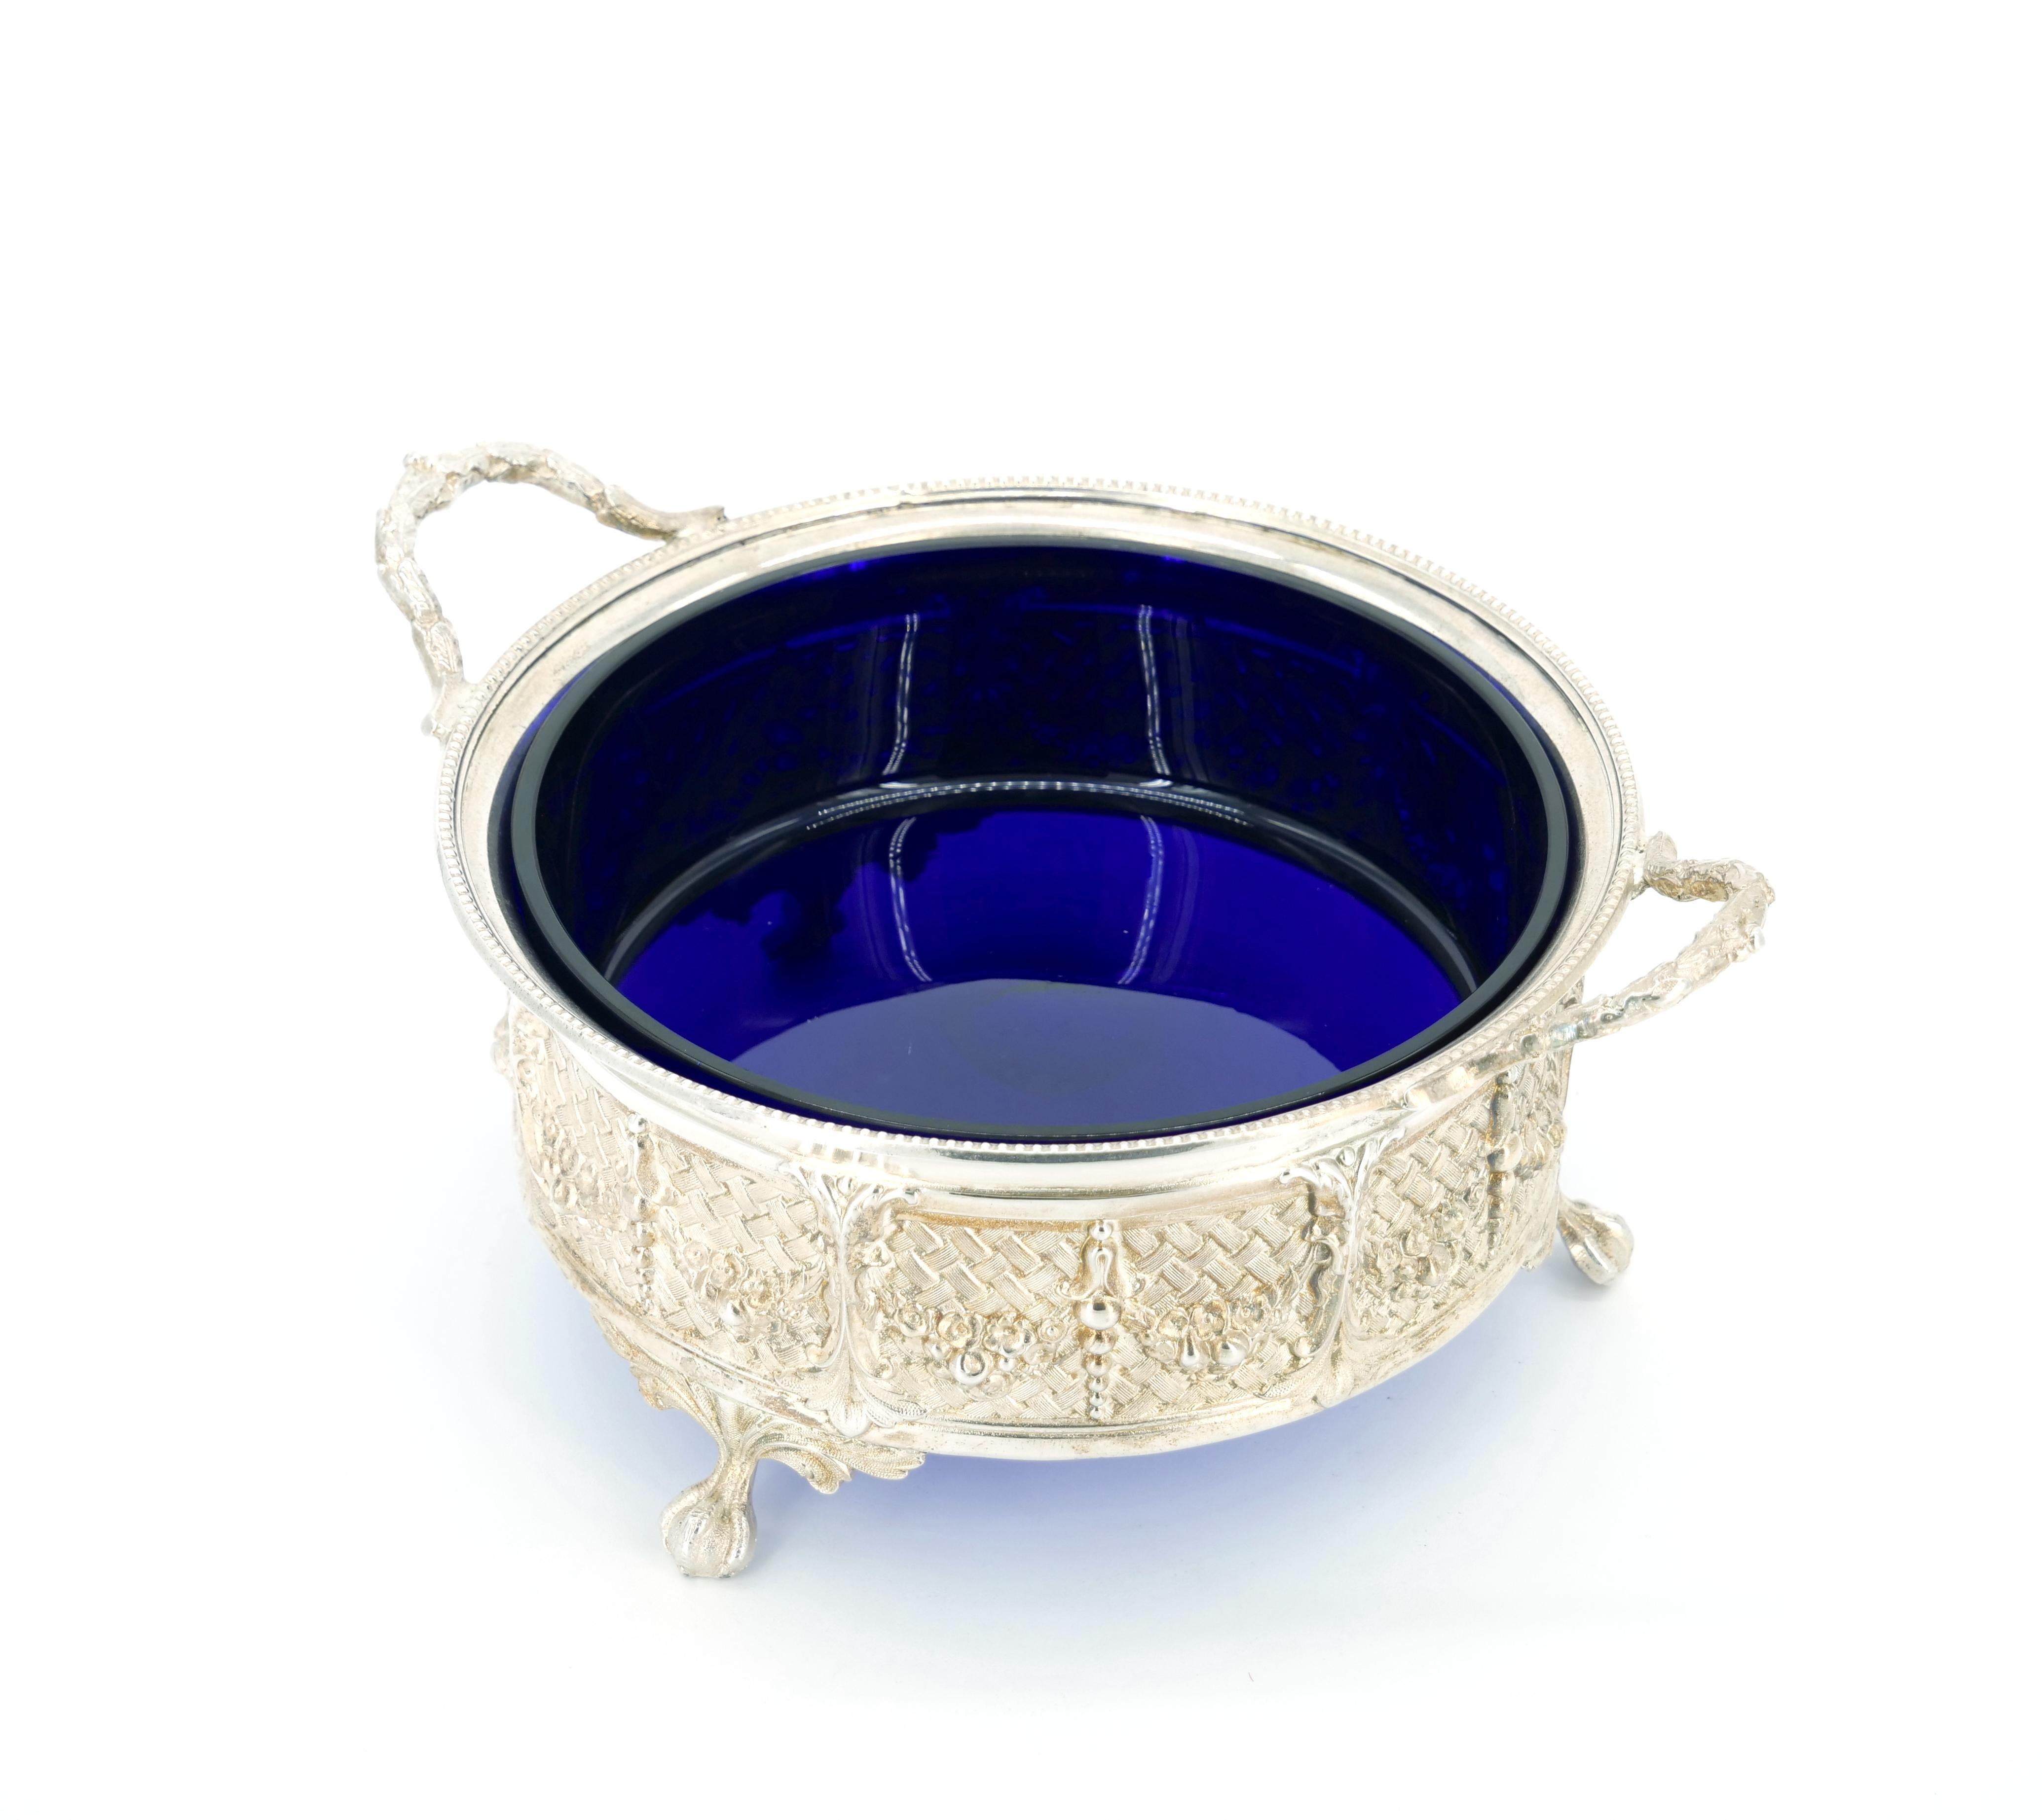 Transform your dining experience with this exquisite Old English Silver Plate serving comport disk, featuring a captivating round cobalt blue glass insert. The silver holding frame is a testament to craftsmanship, adorned with an intricate all-over